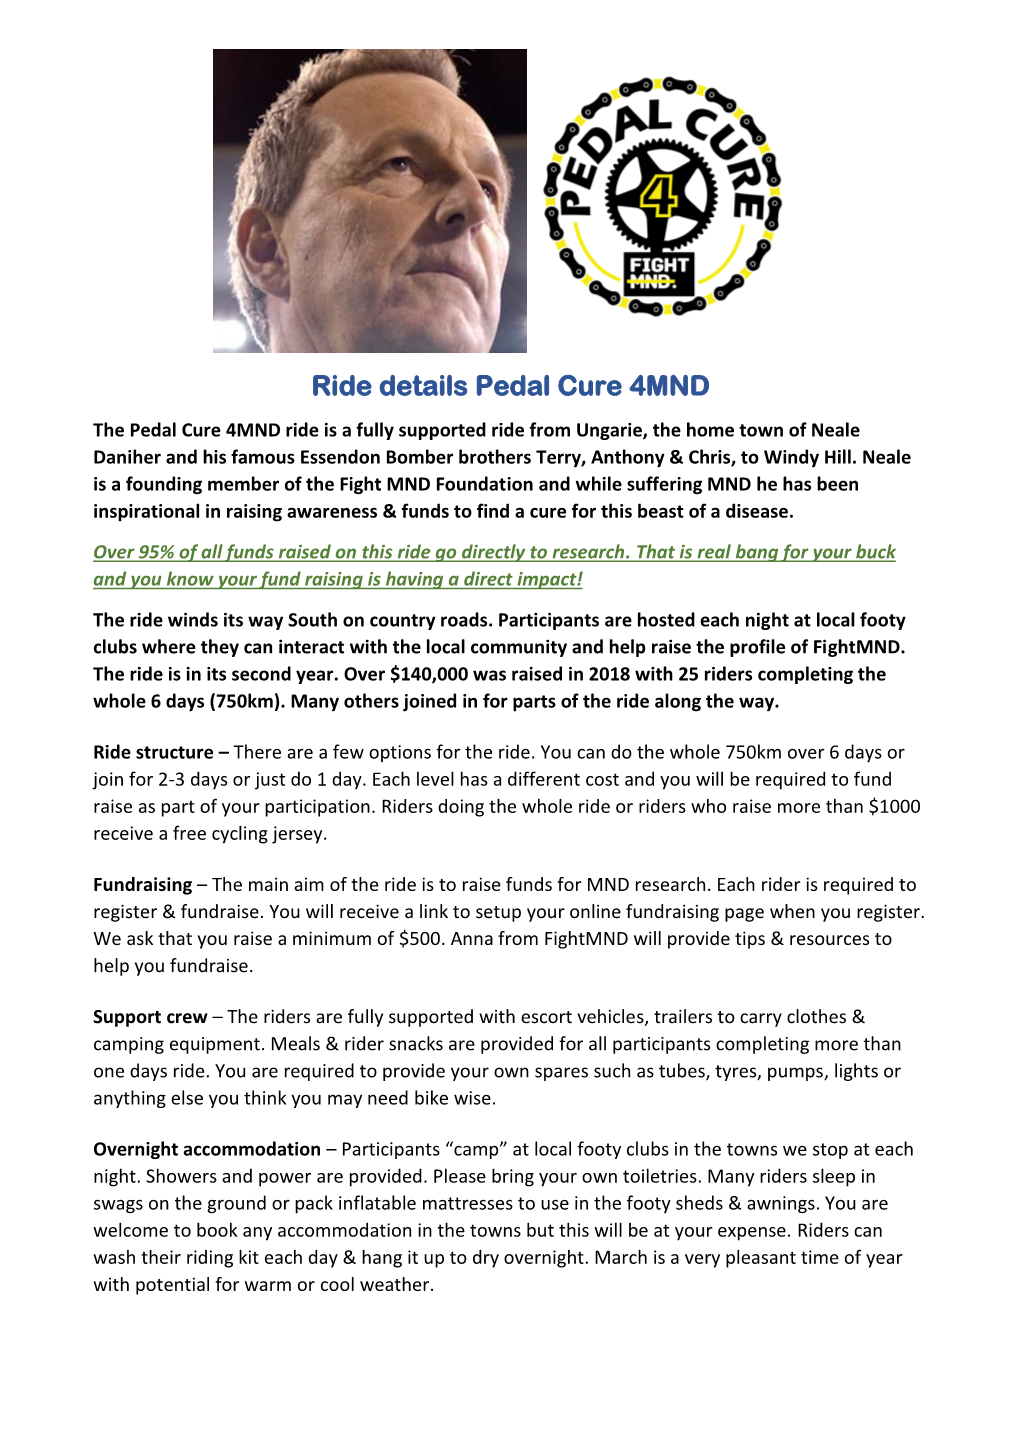 Ride Details Pedal Cure 4MND